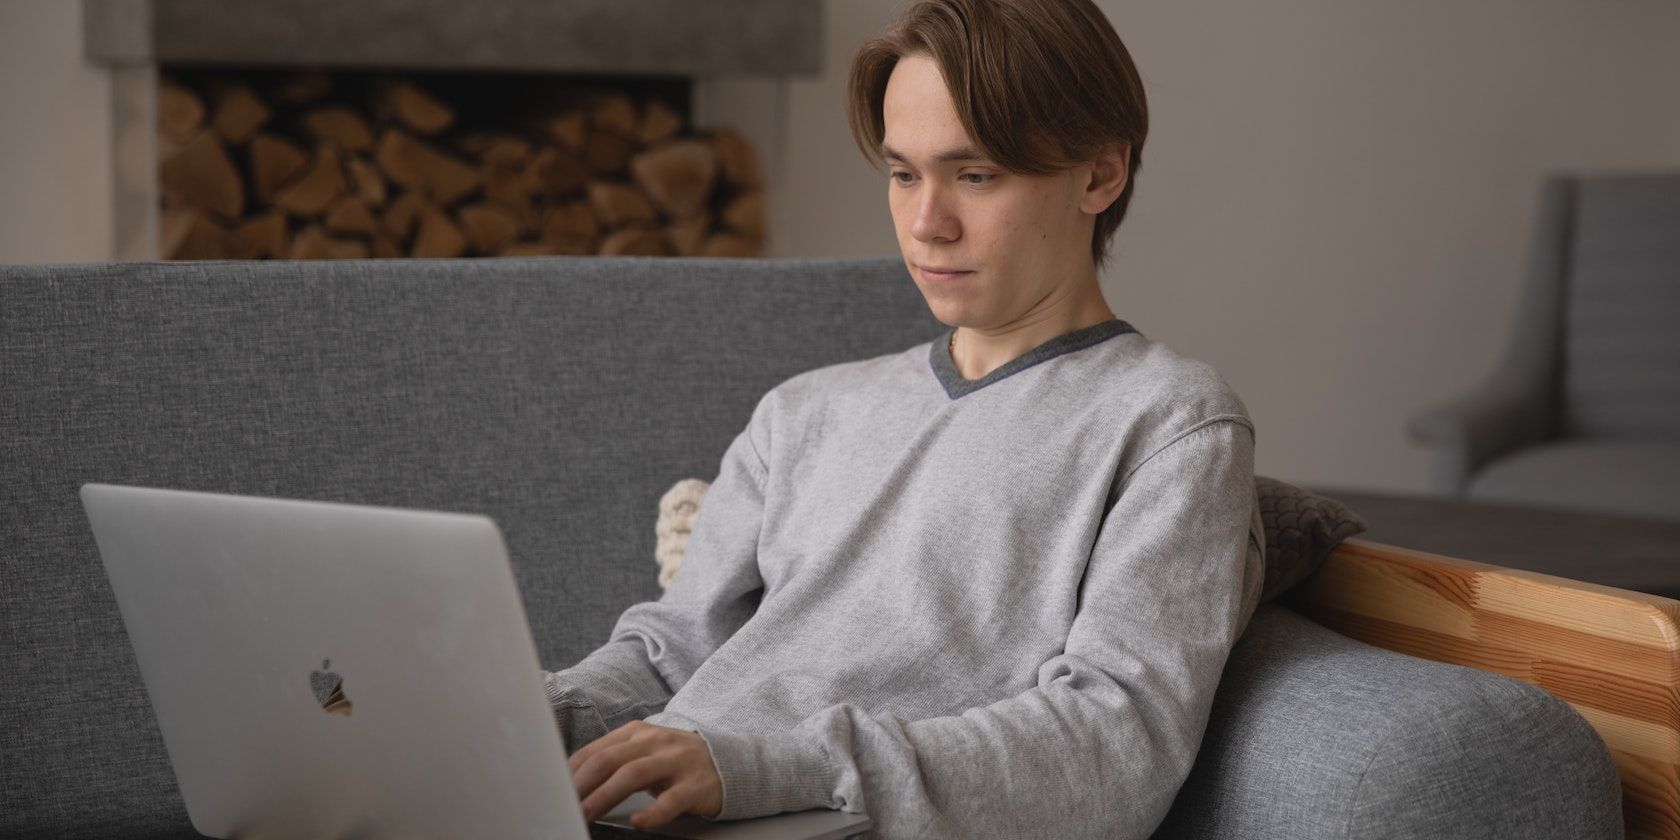 Man using a MacBook on a Couch